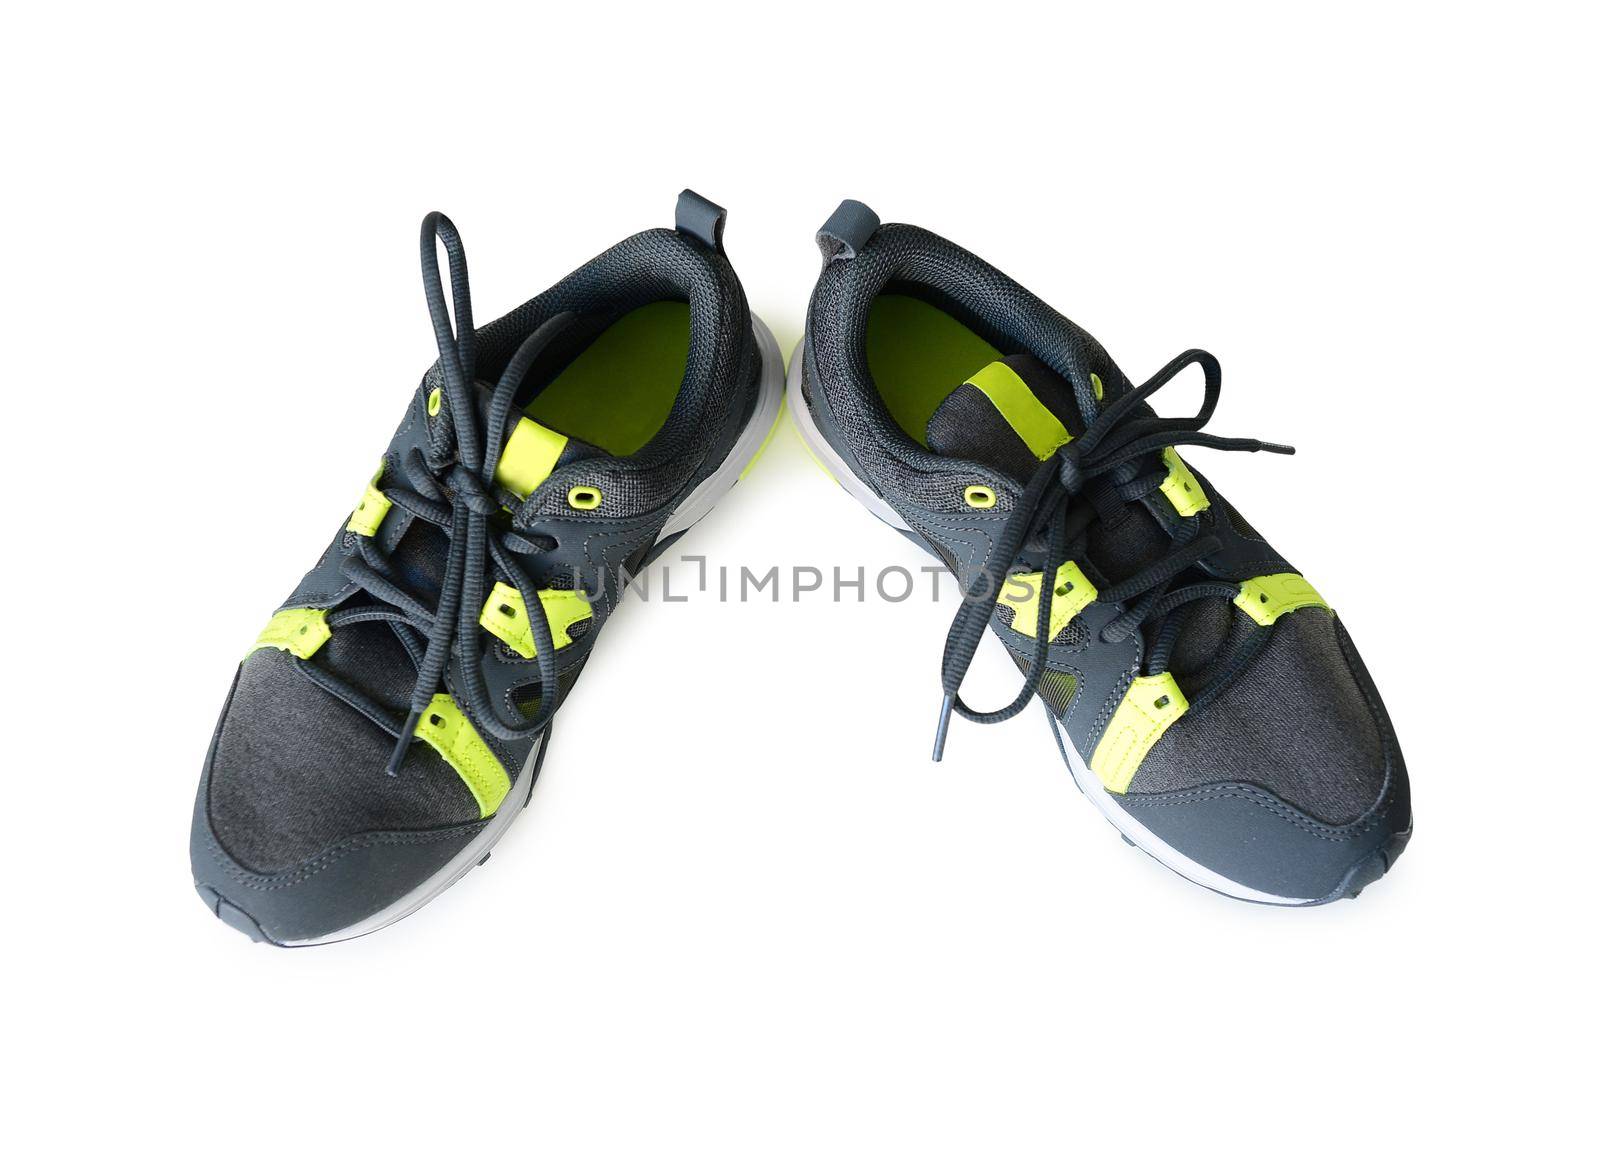 grey sneakers with neon green inserts by tan4ikk1